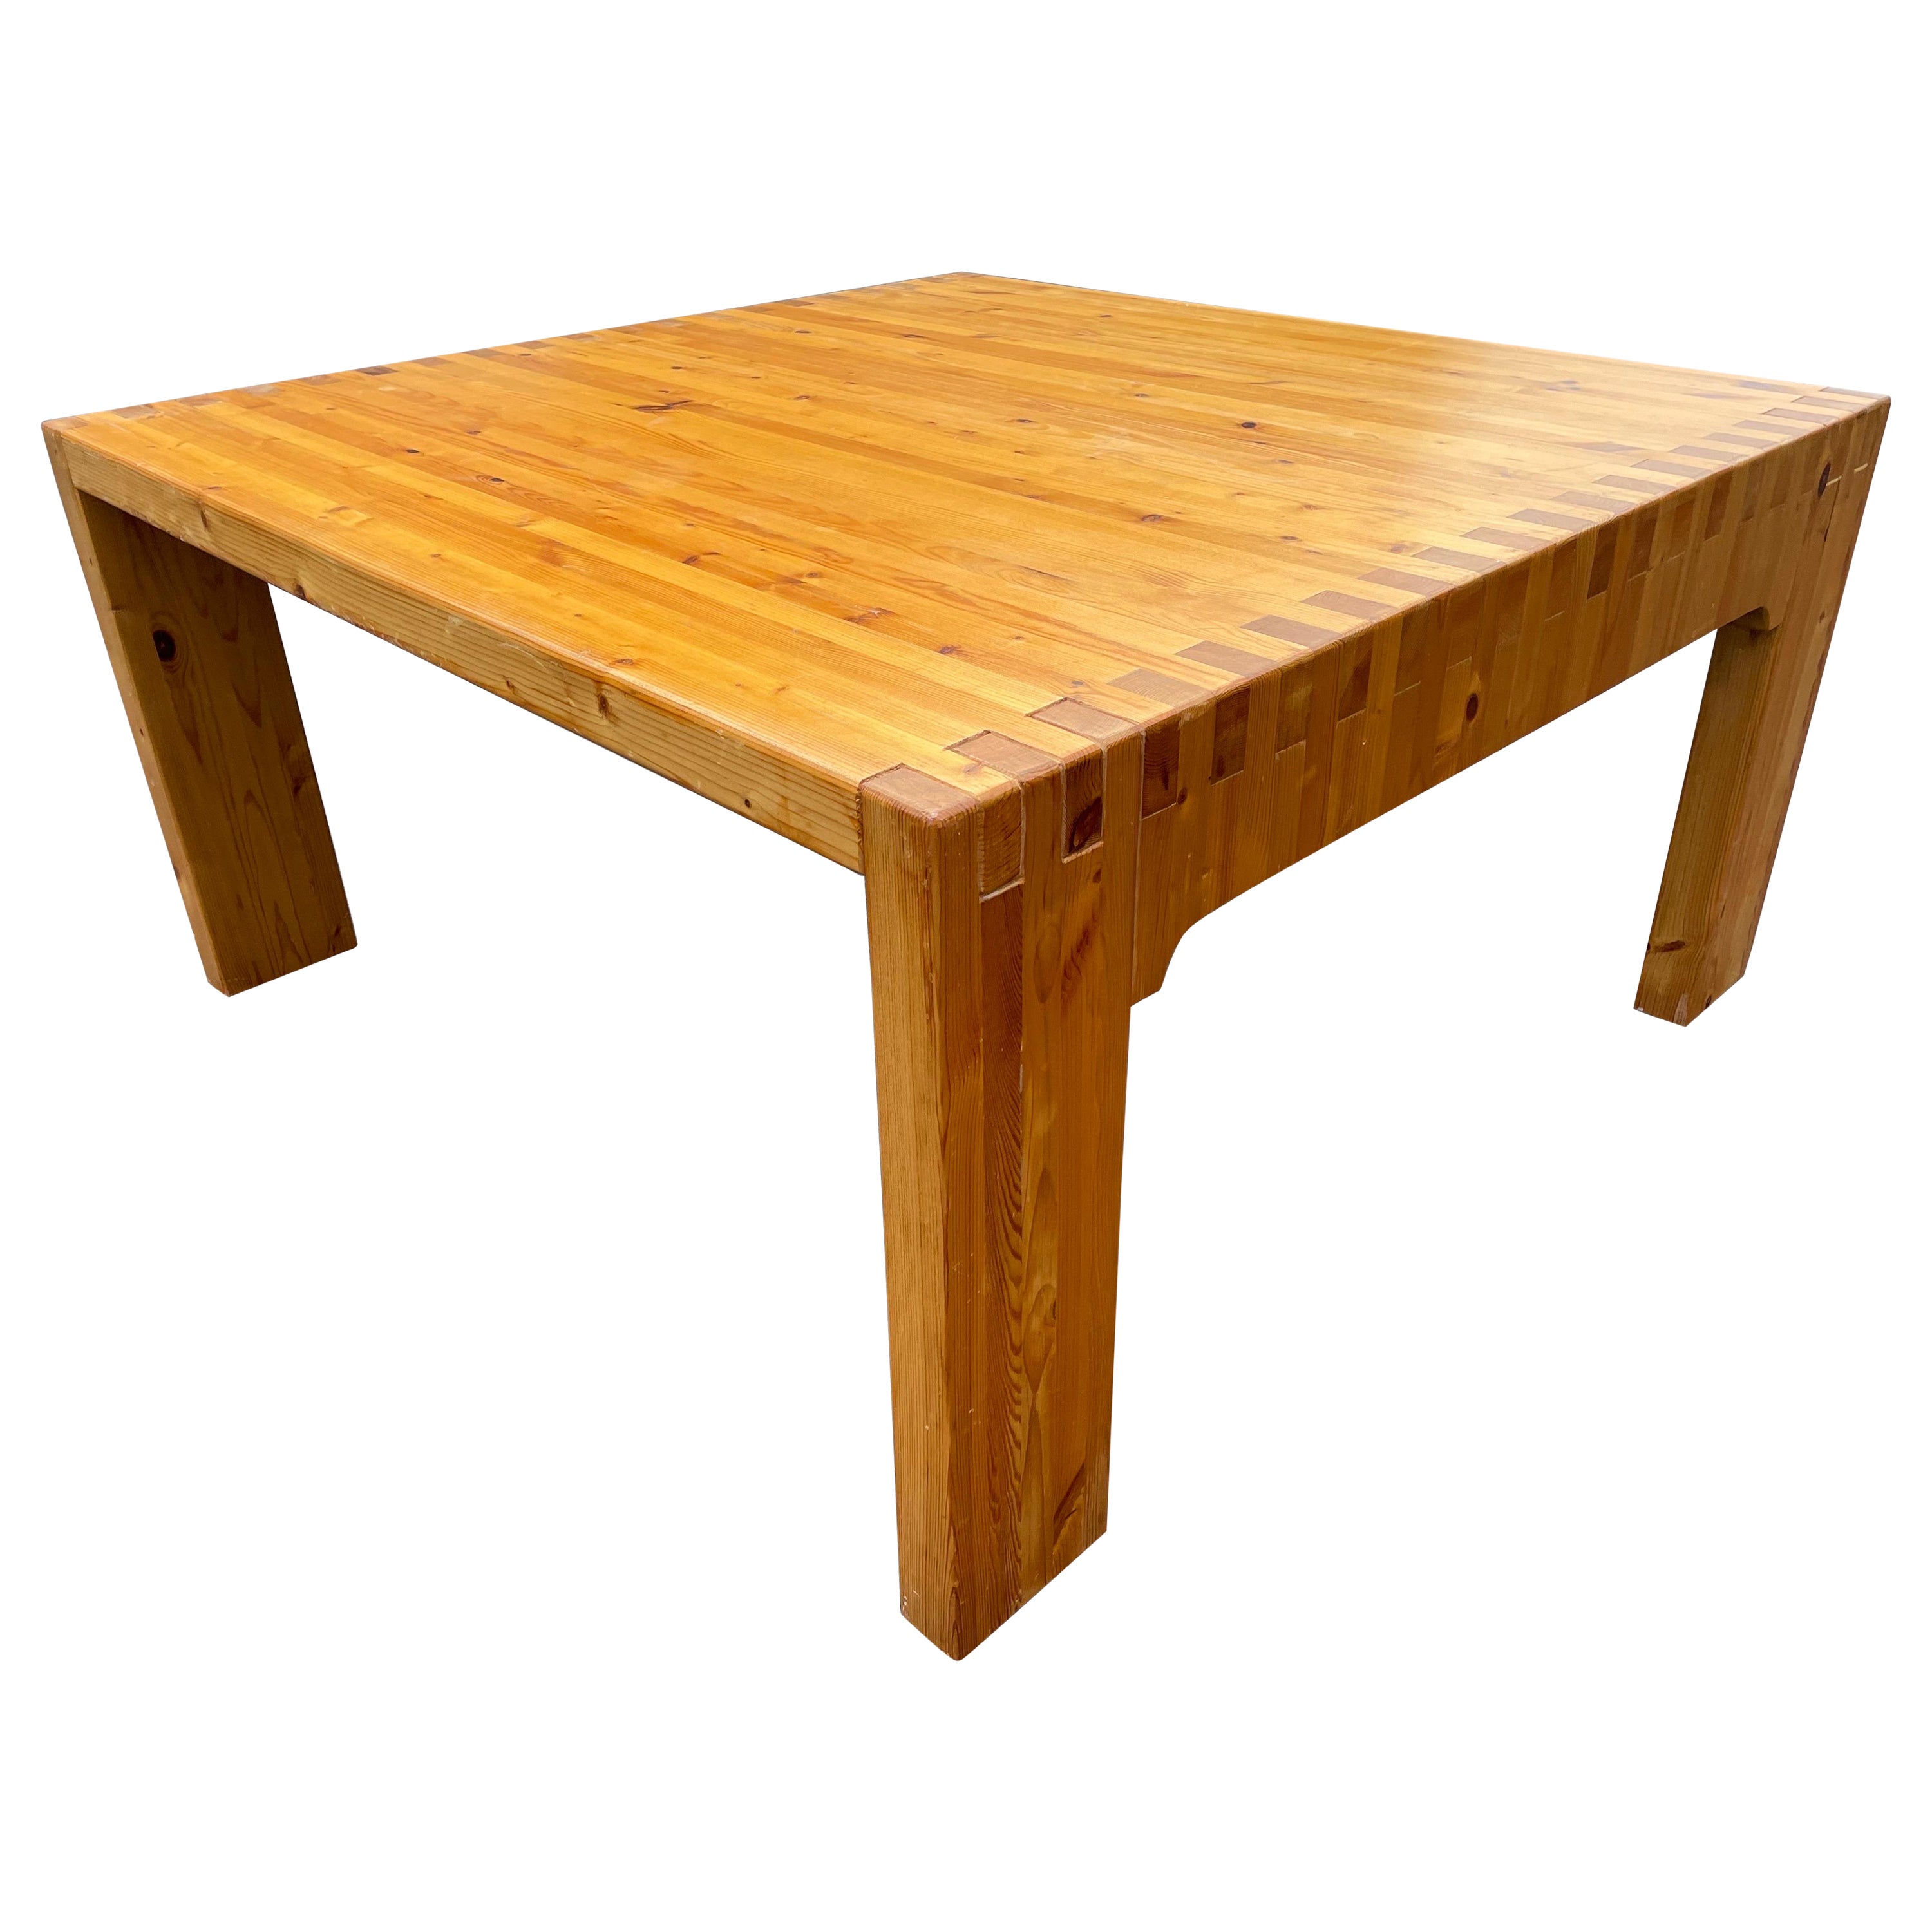 A Danish mid-century modern brutalist coffee table in solid pine from the 1970´s